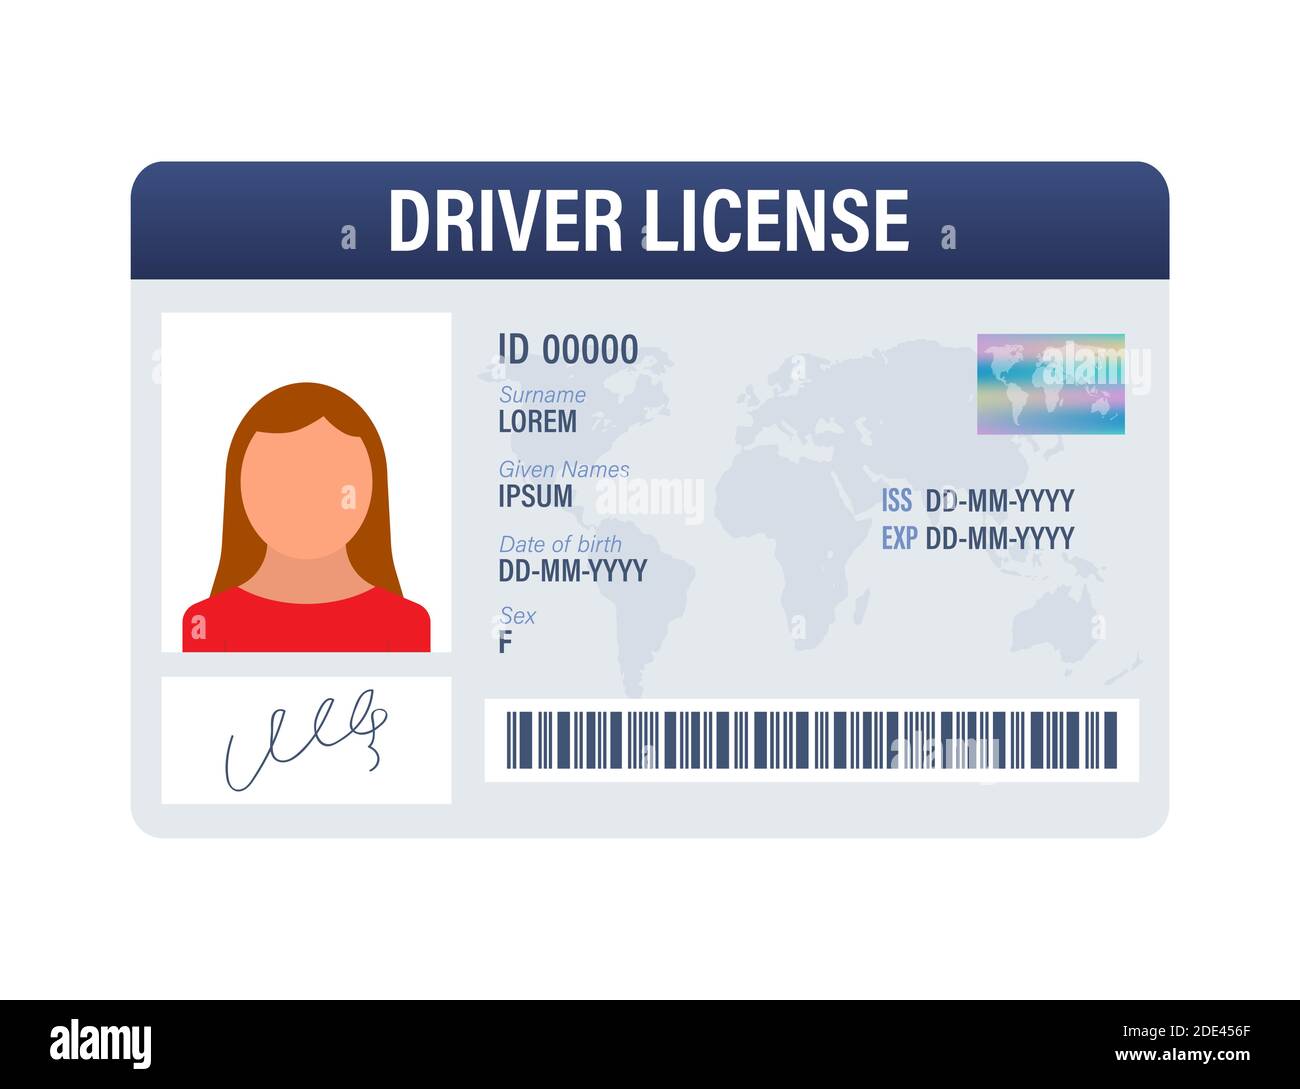 Check Driving Licence Using A Code